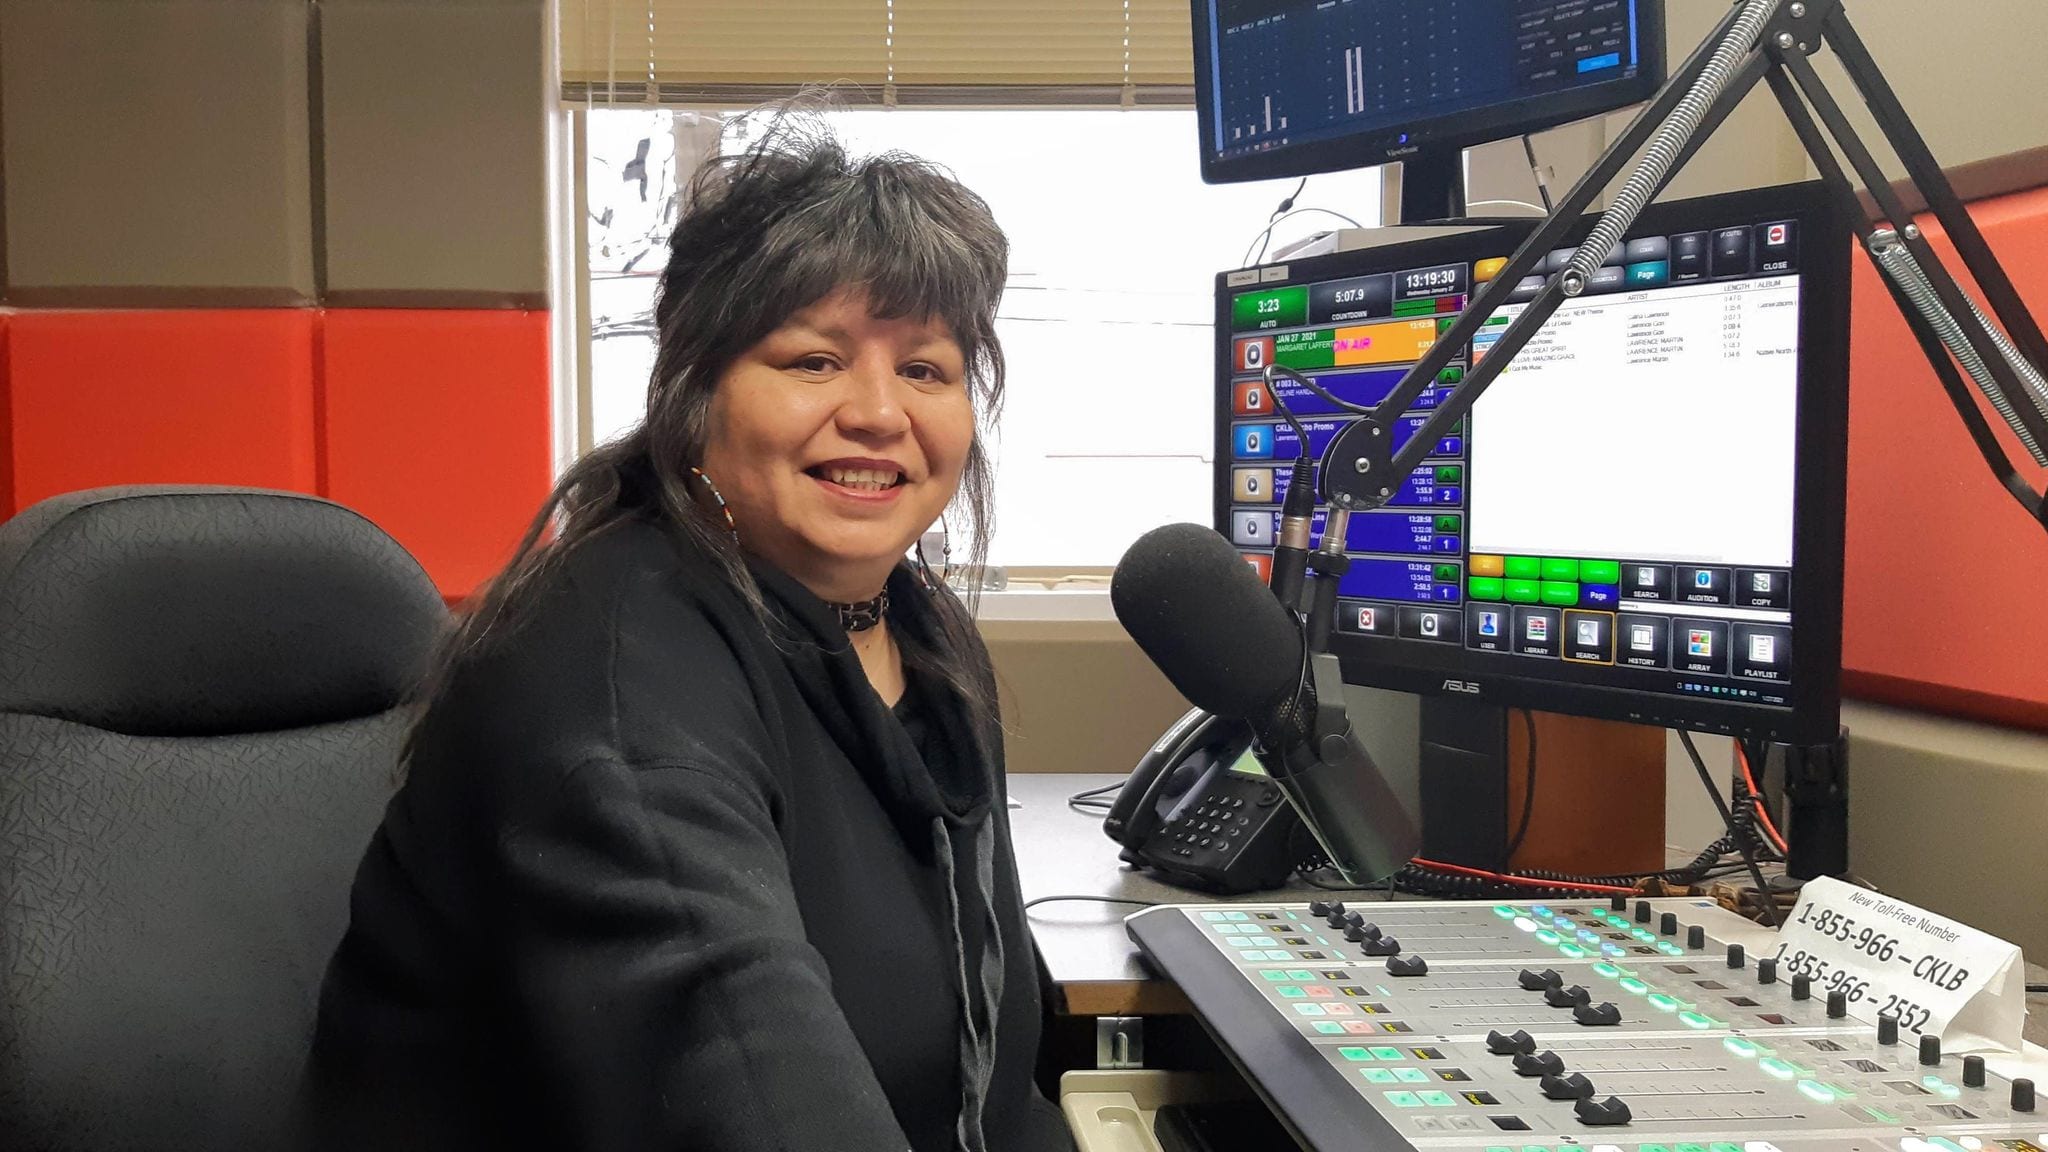 Myra Conrad, host of the Saturday Request Show on CKLB aired the dozens of supportive messages from listeners for the 'Dear Fort Liard' campaign that ran primarily on Jan. 23, though the station will accept messages for the campaign until Jan. 30. photo courtesy of CKLB